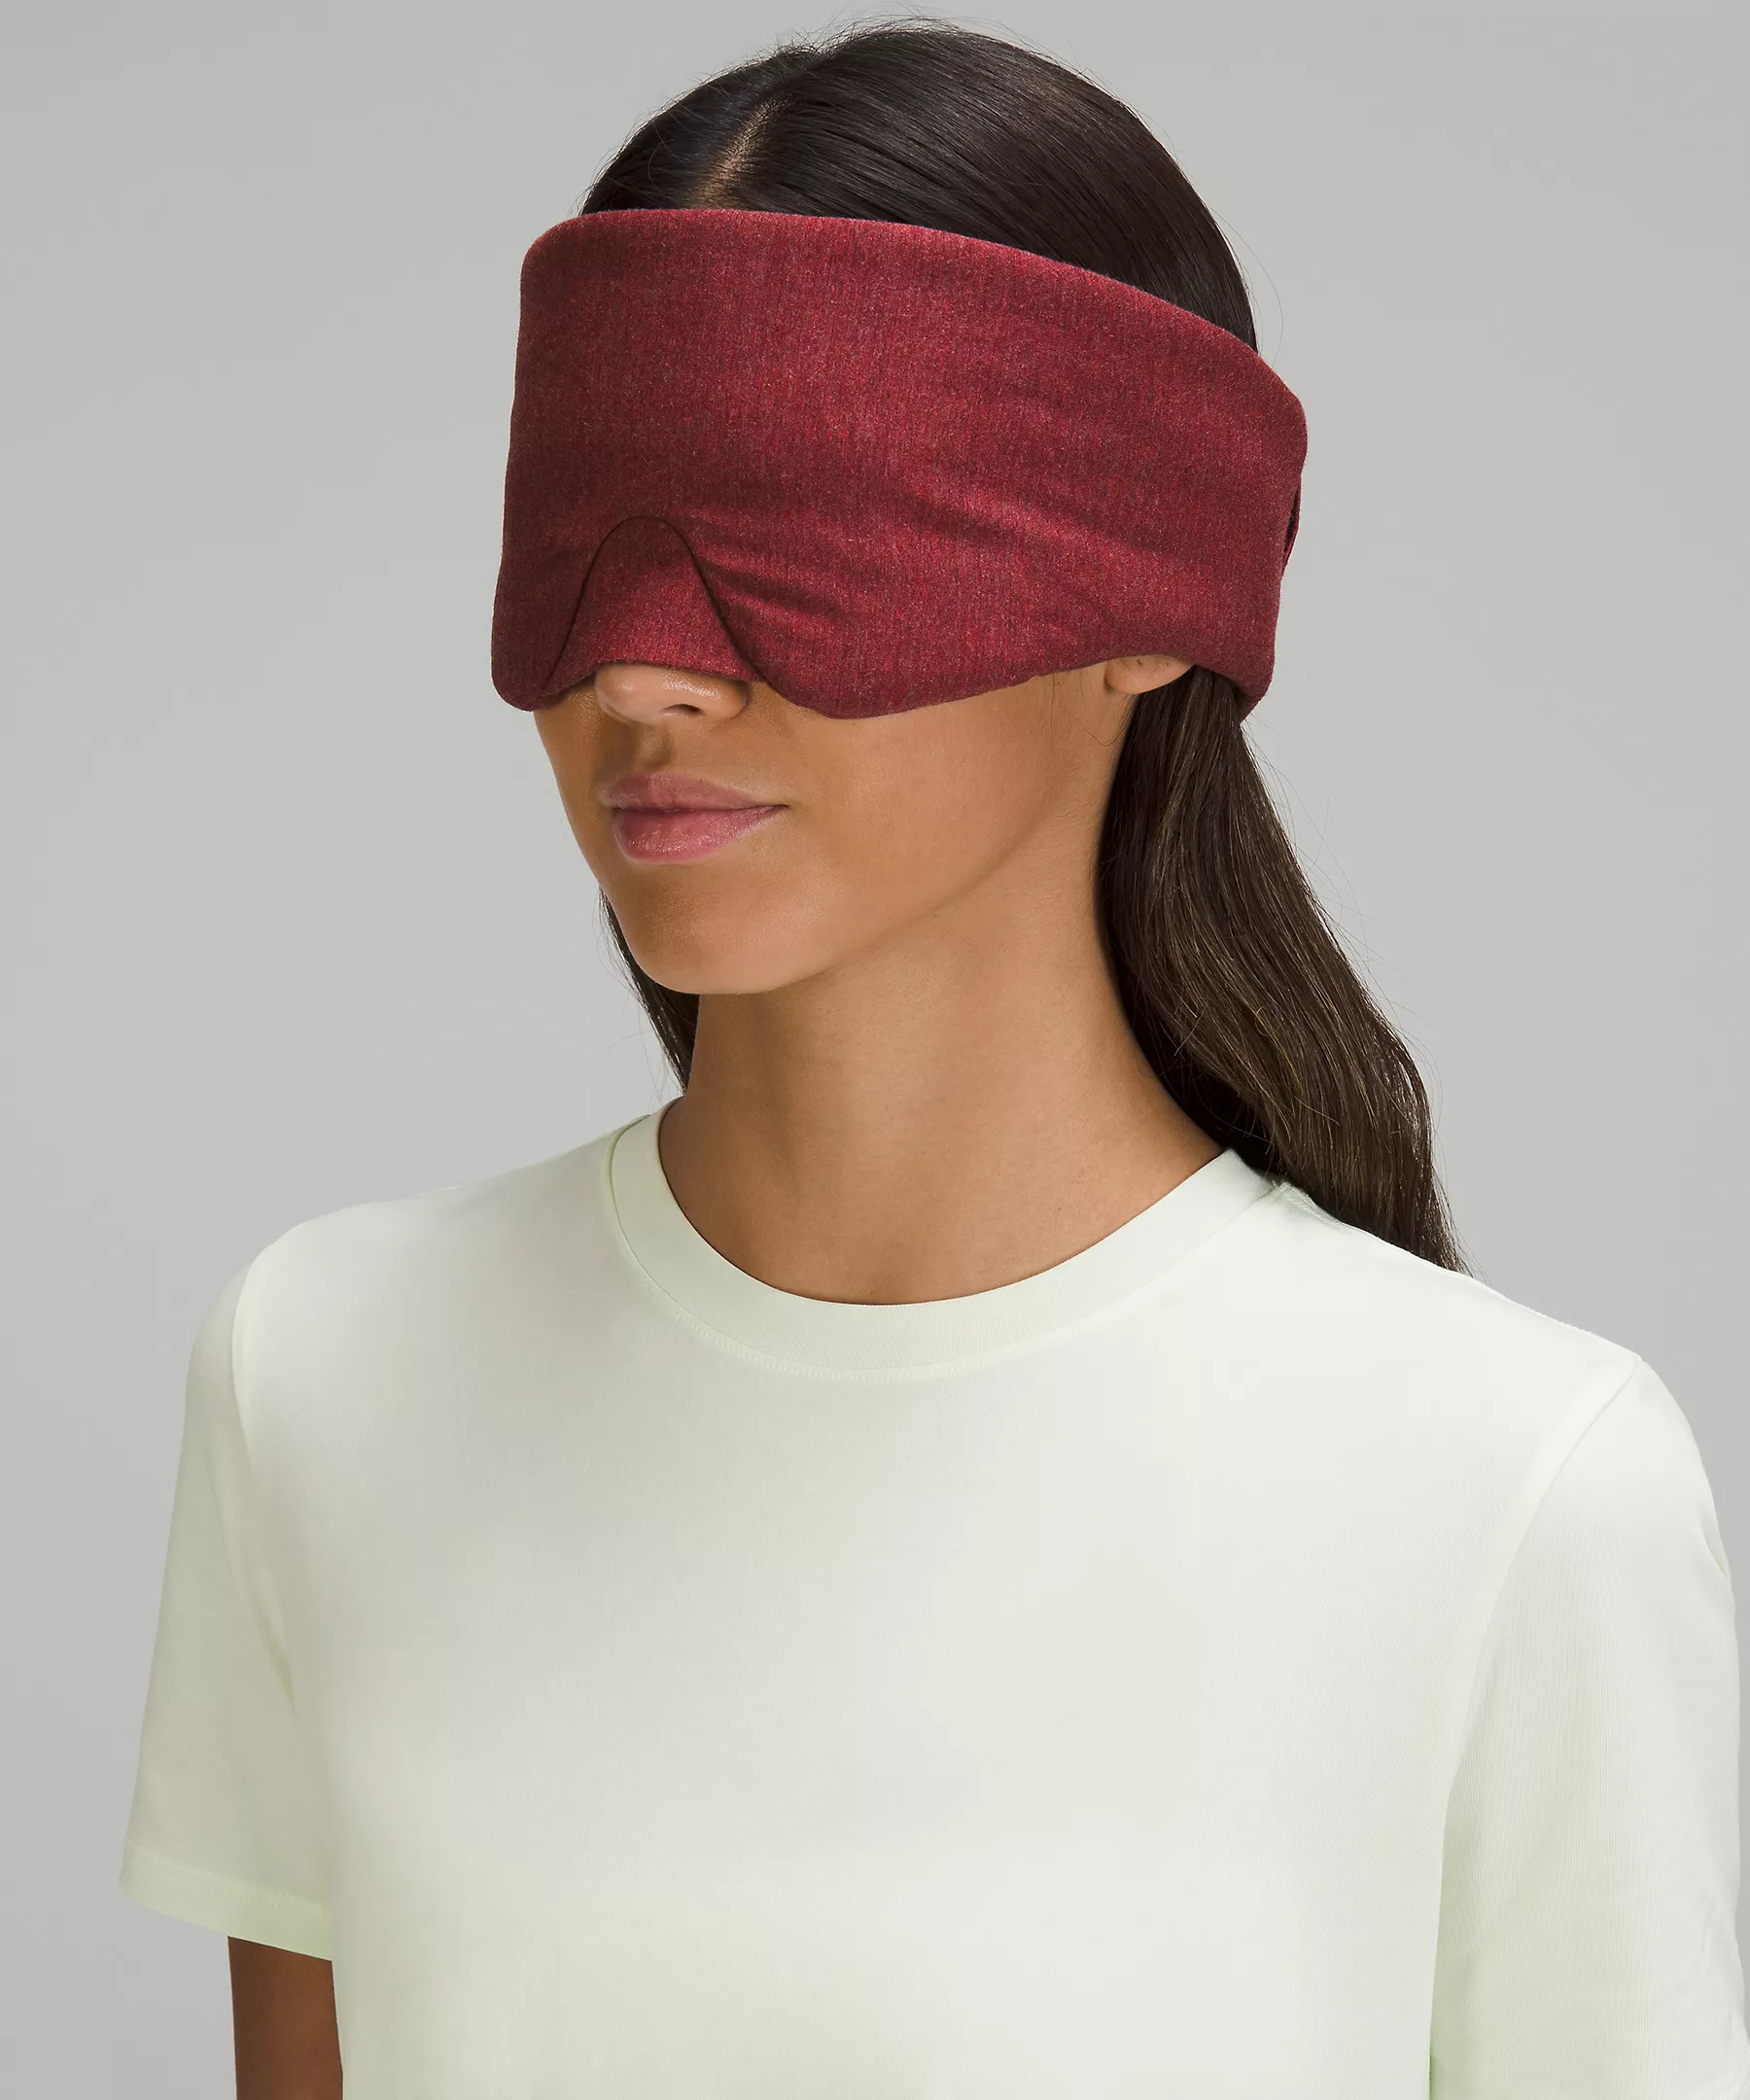 Rest and Restore Eye Mask